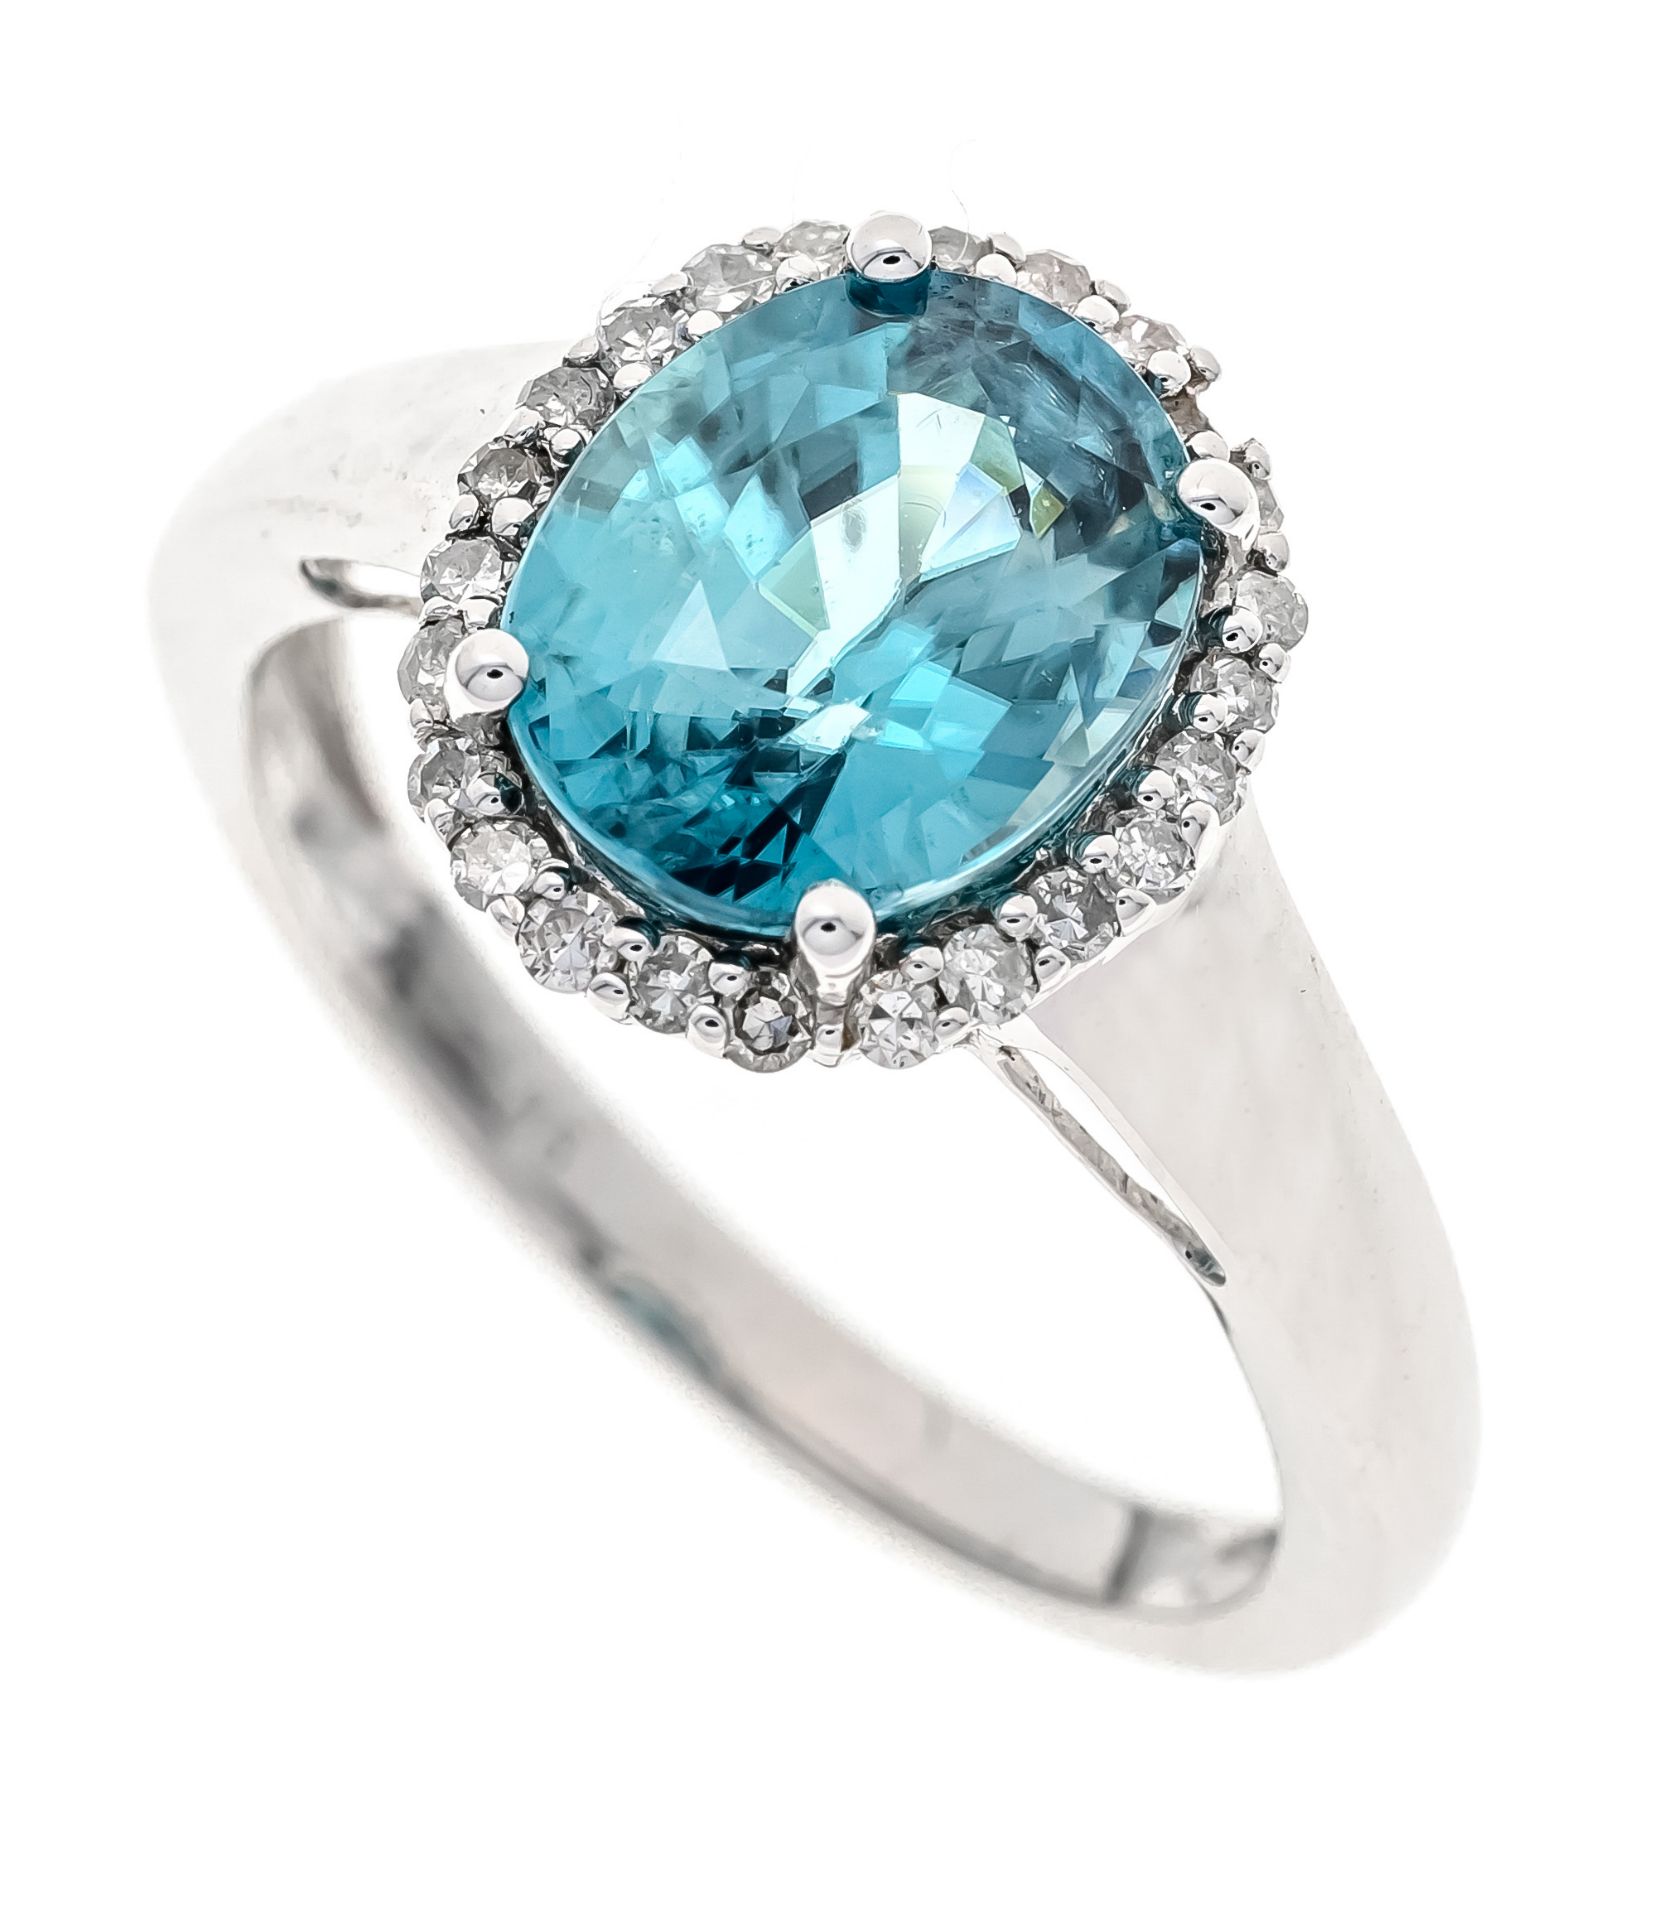 Zircon diamond ring WG 585/000 with one oval faceted blue zircon 10 x 8 mm and 23 octagonal